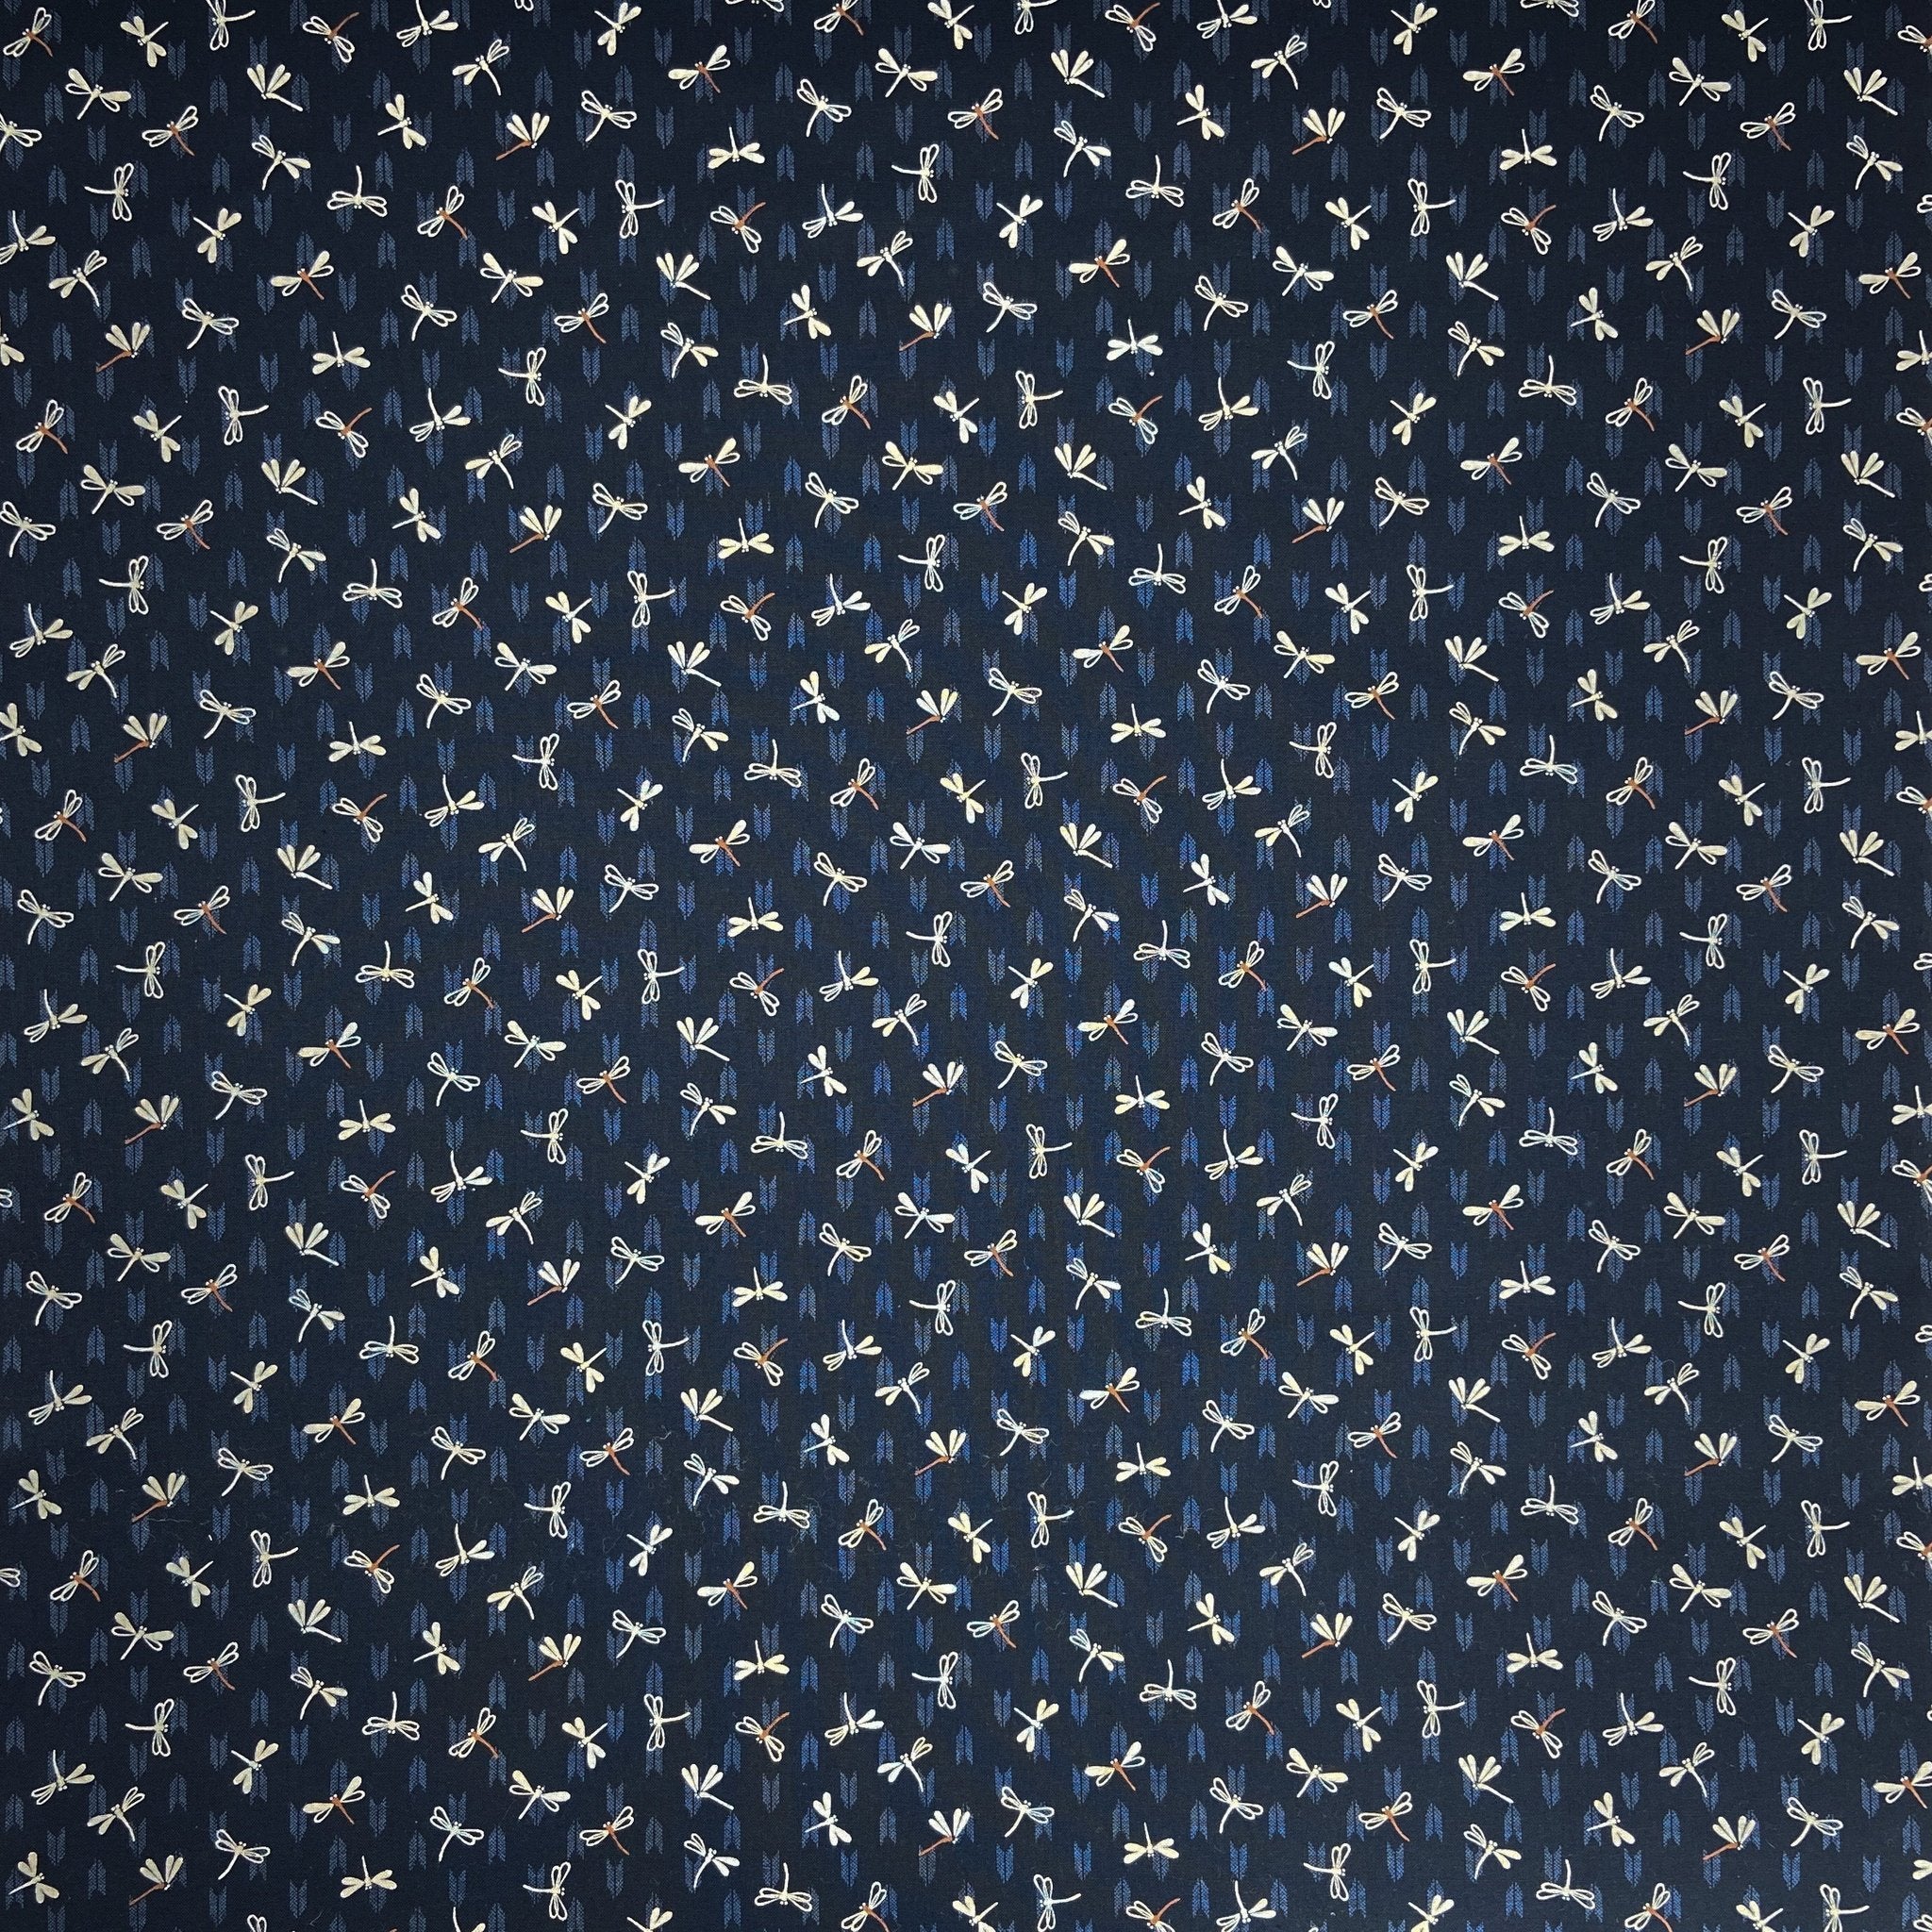 Japanese Cotton Sheeting Print - Dragonflies with Arrows Navy